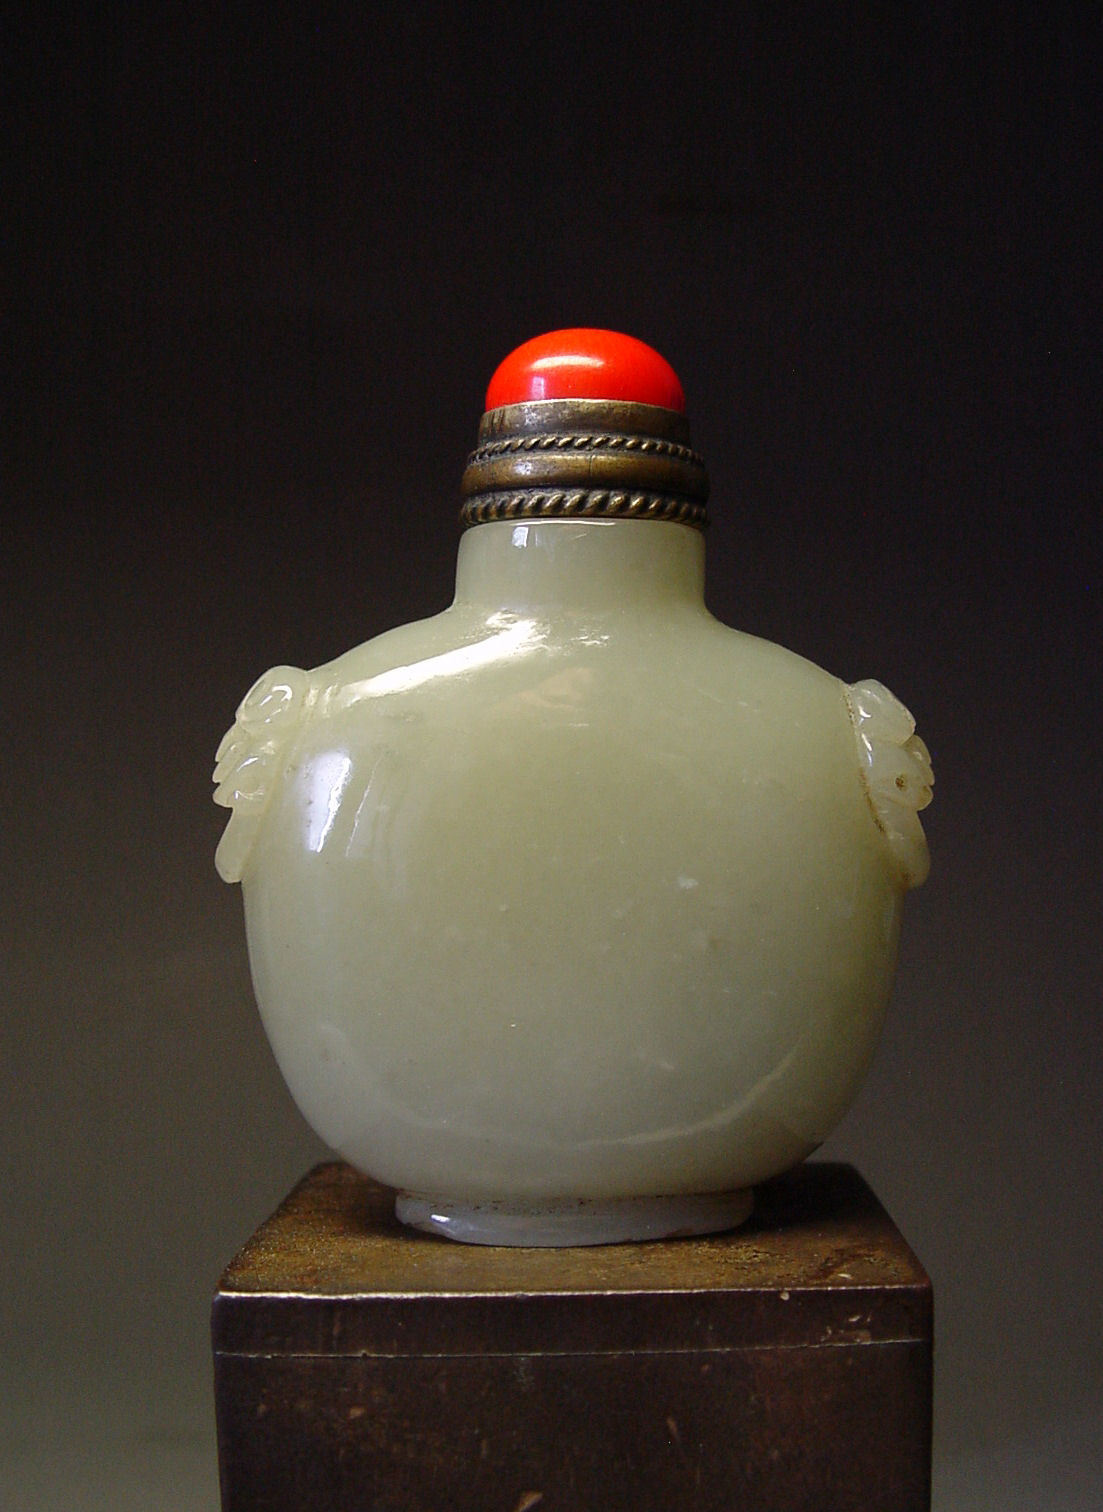 ANTIQUE CHINESE IMPERIAL \'CELADON JADE\' SNUFF BOTTLE, QING DYNASTY, 18th C.